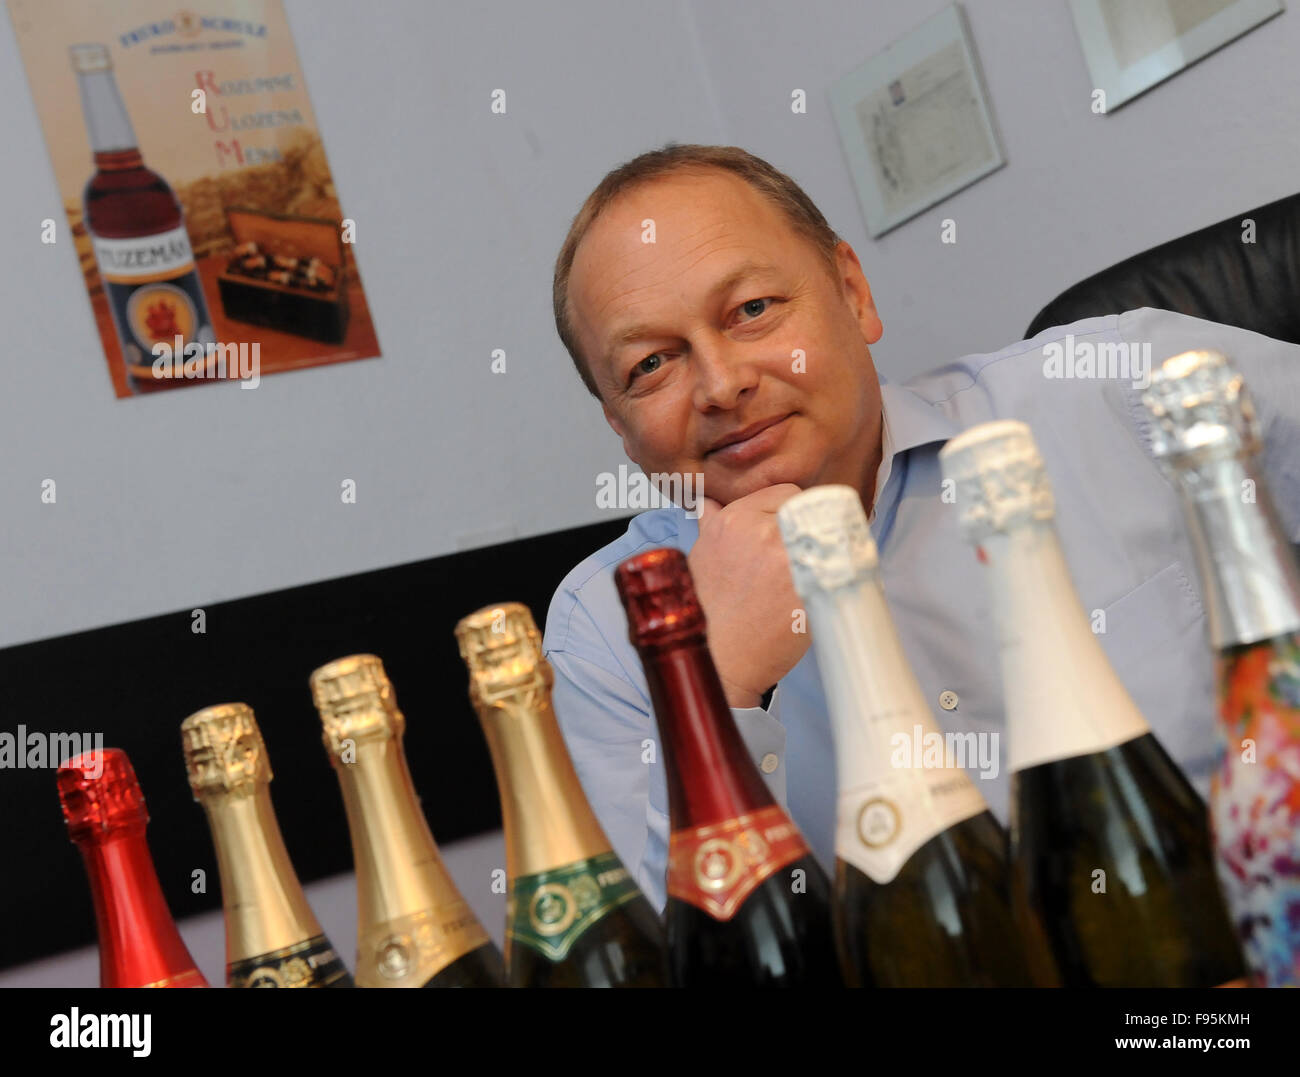 Jindrichuv Hradec, Czech Republic. 14th Dec, 2015. CEO of Fruko Schulz company Josef Nejedly in Jindrichuv Hradec, Czech Republic, December 14, 2015. Fruko Schulz is one of the largest Czech manufacturers of spirits and liqueurs. © Vaclav Pancer/CTK Photo/Alamy Live News Stock Photo